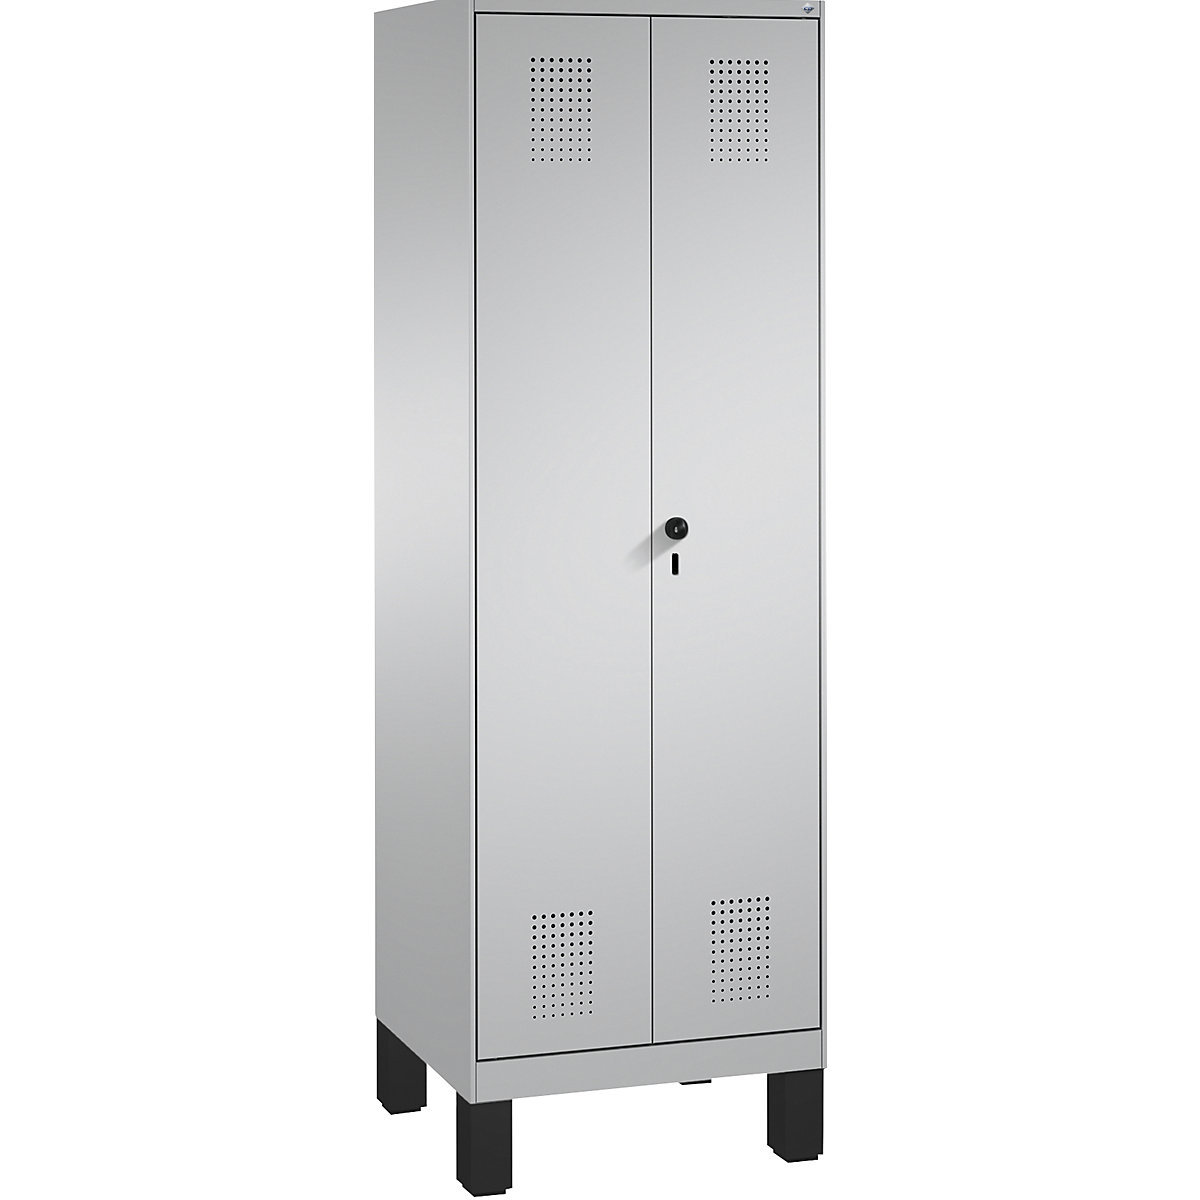 EVOLO storage cupboard, doors close in the middle, with feet – C+P, 2 compartments, 8 shelves, compartment width 300 mm, white aluminium / white aluminium